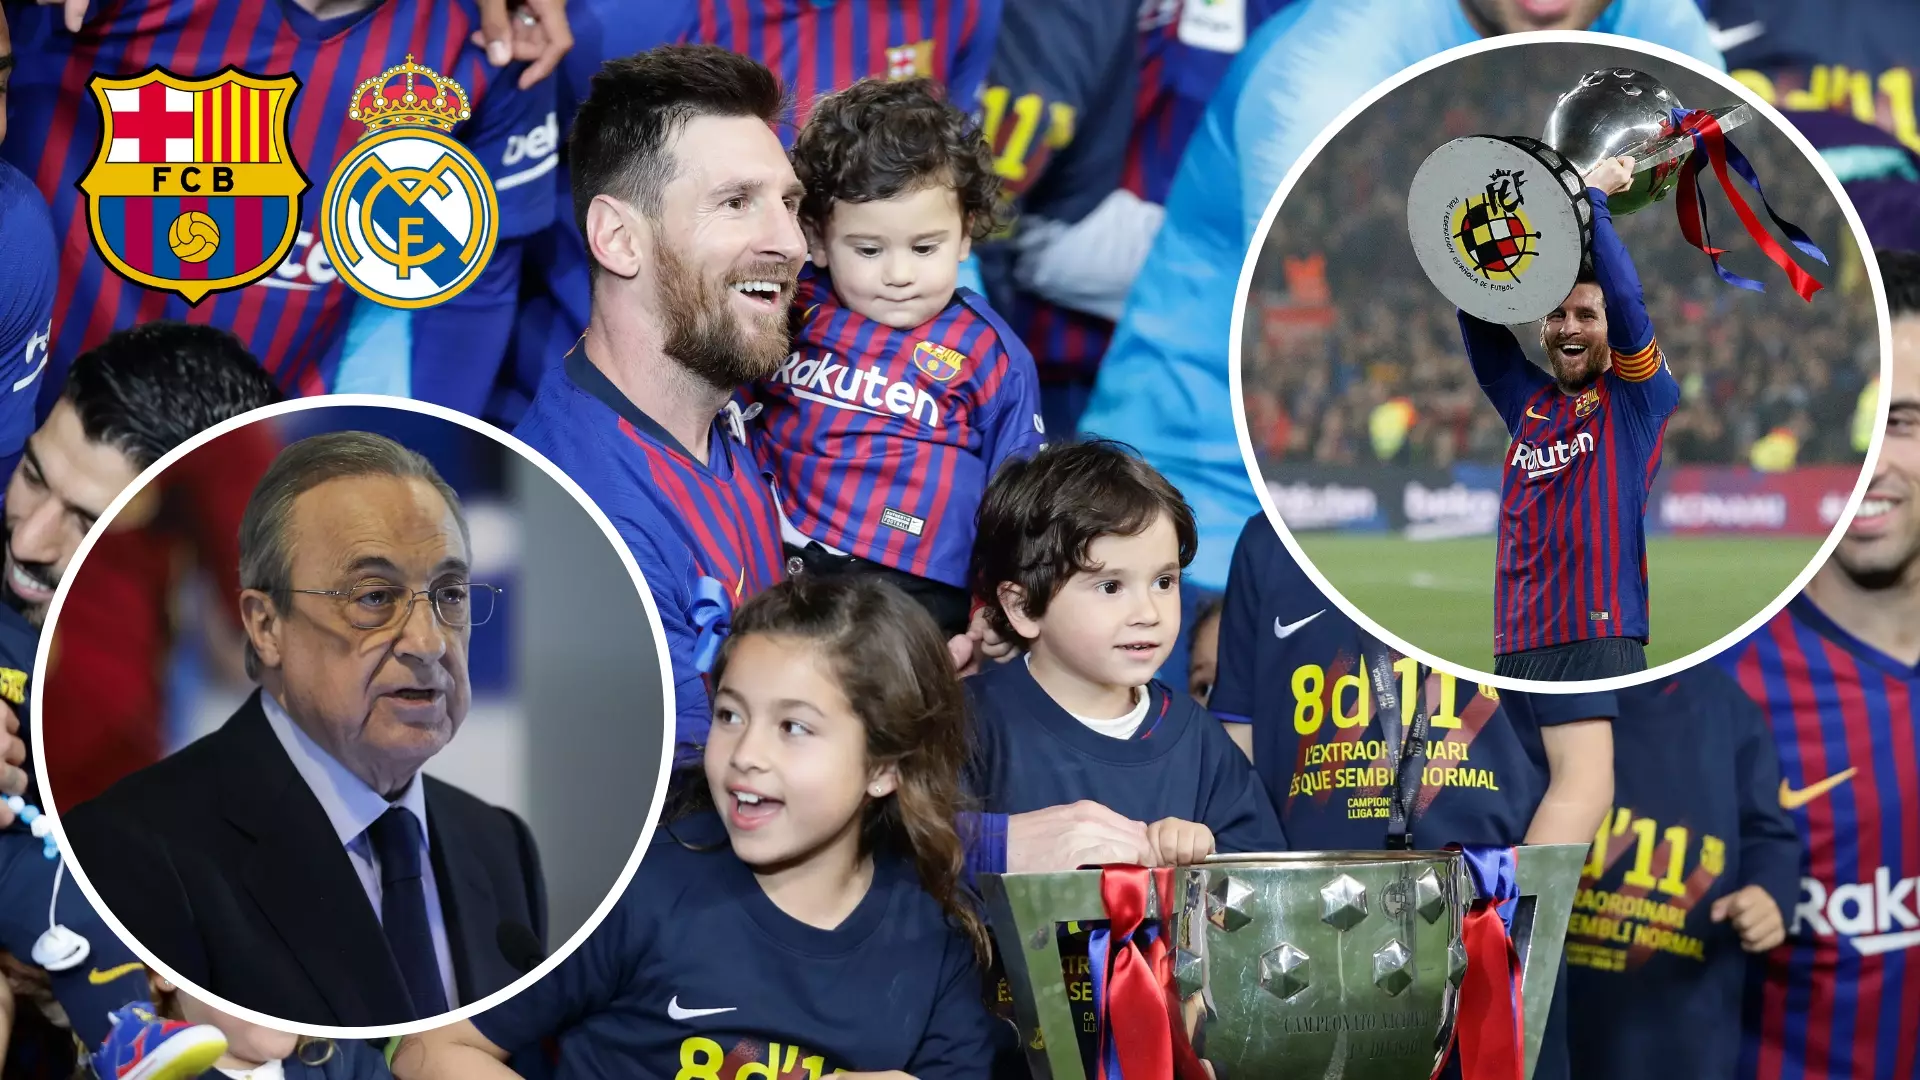 Barcelona Have Surpassed Real Madrid In Their Trophy Haul Thanks To Lionel Messi’s Exploits